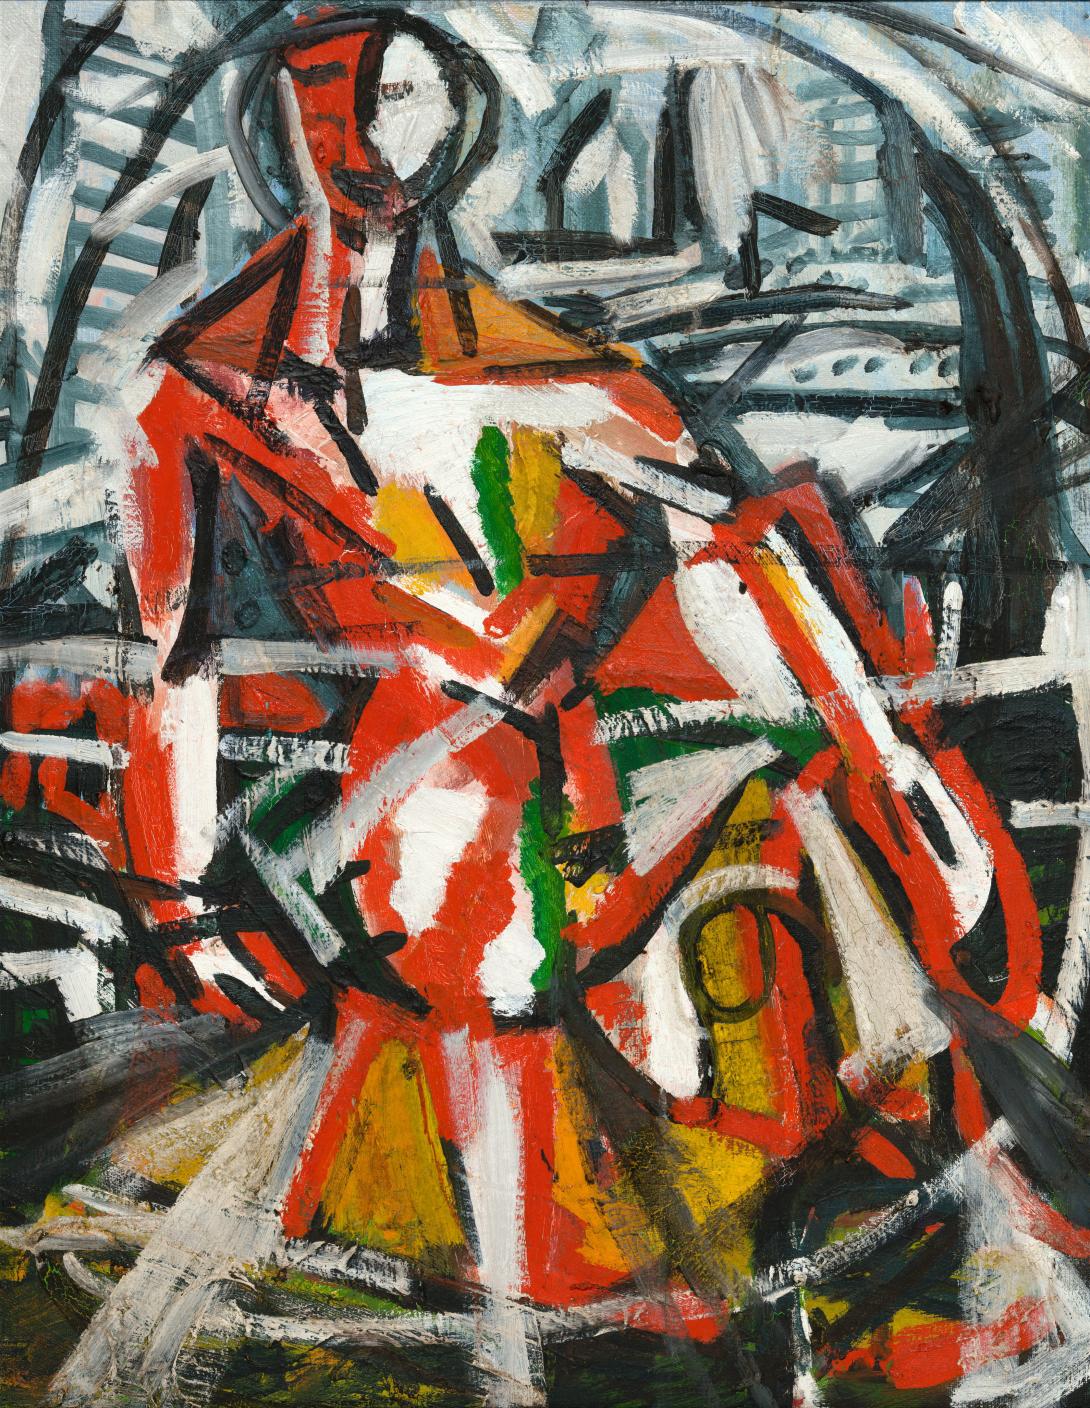 An abstract oil painting depicting a person painted in reds, oranges and greens sitting in an abstract car.